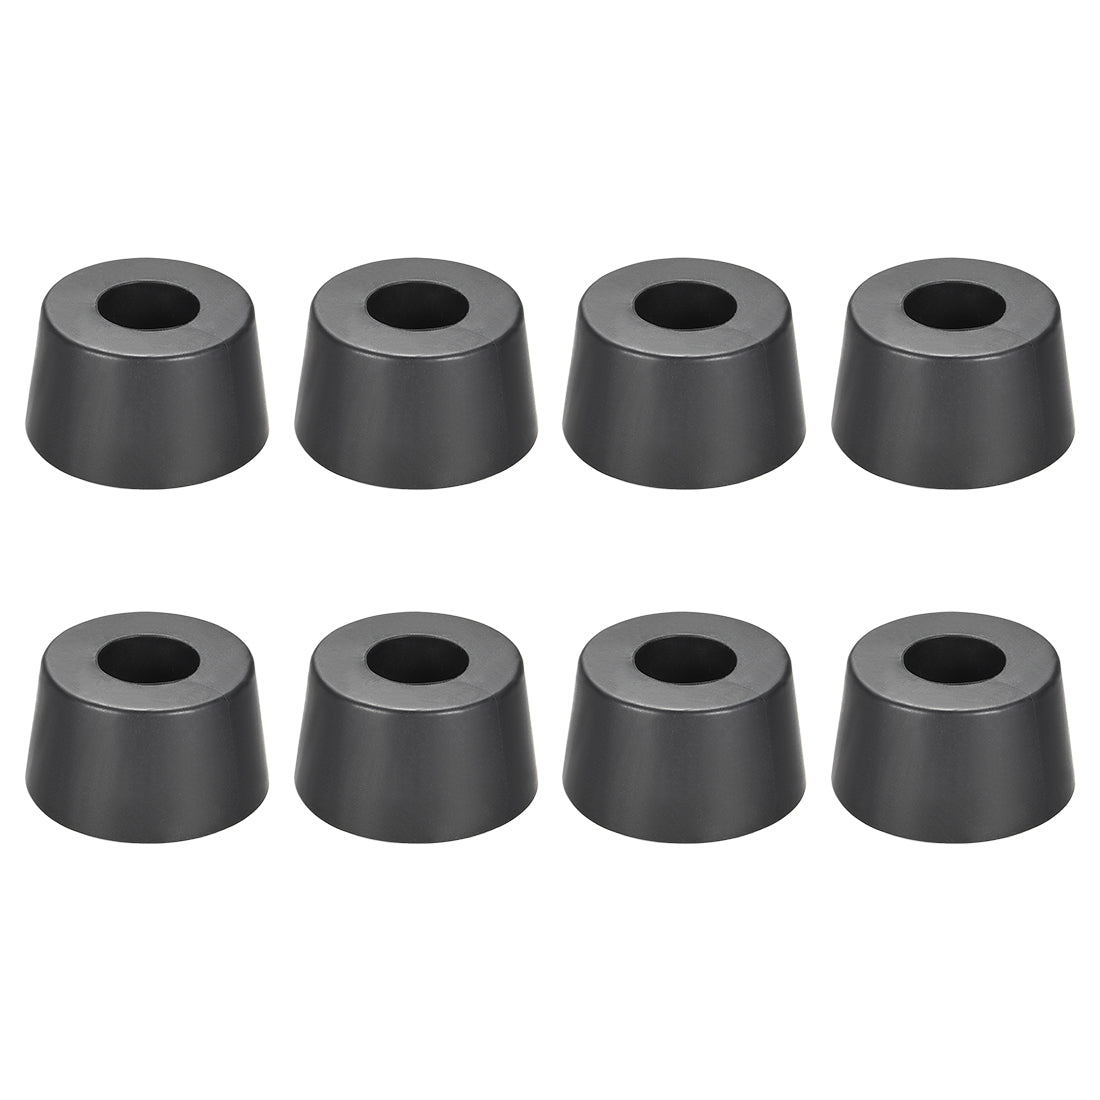 uxcell Uxcell 8 Pcs D33xH19mm Rubber Feet Anti-Vibration Base Pad Stand for Speaker Guitar Amplifier HiFi